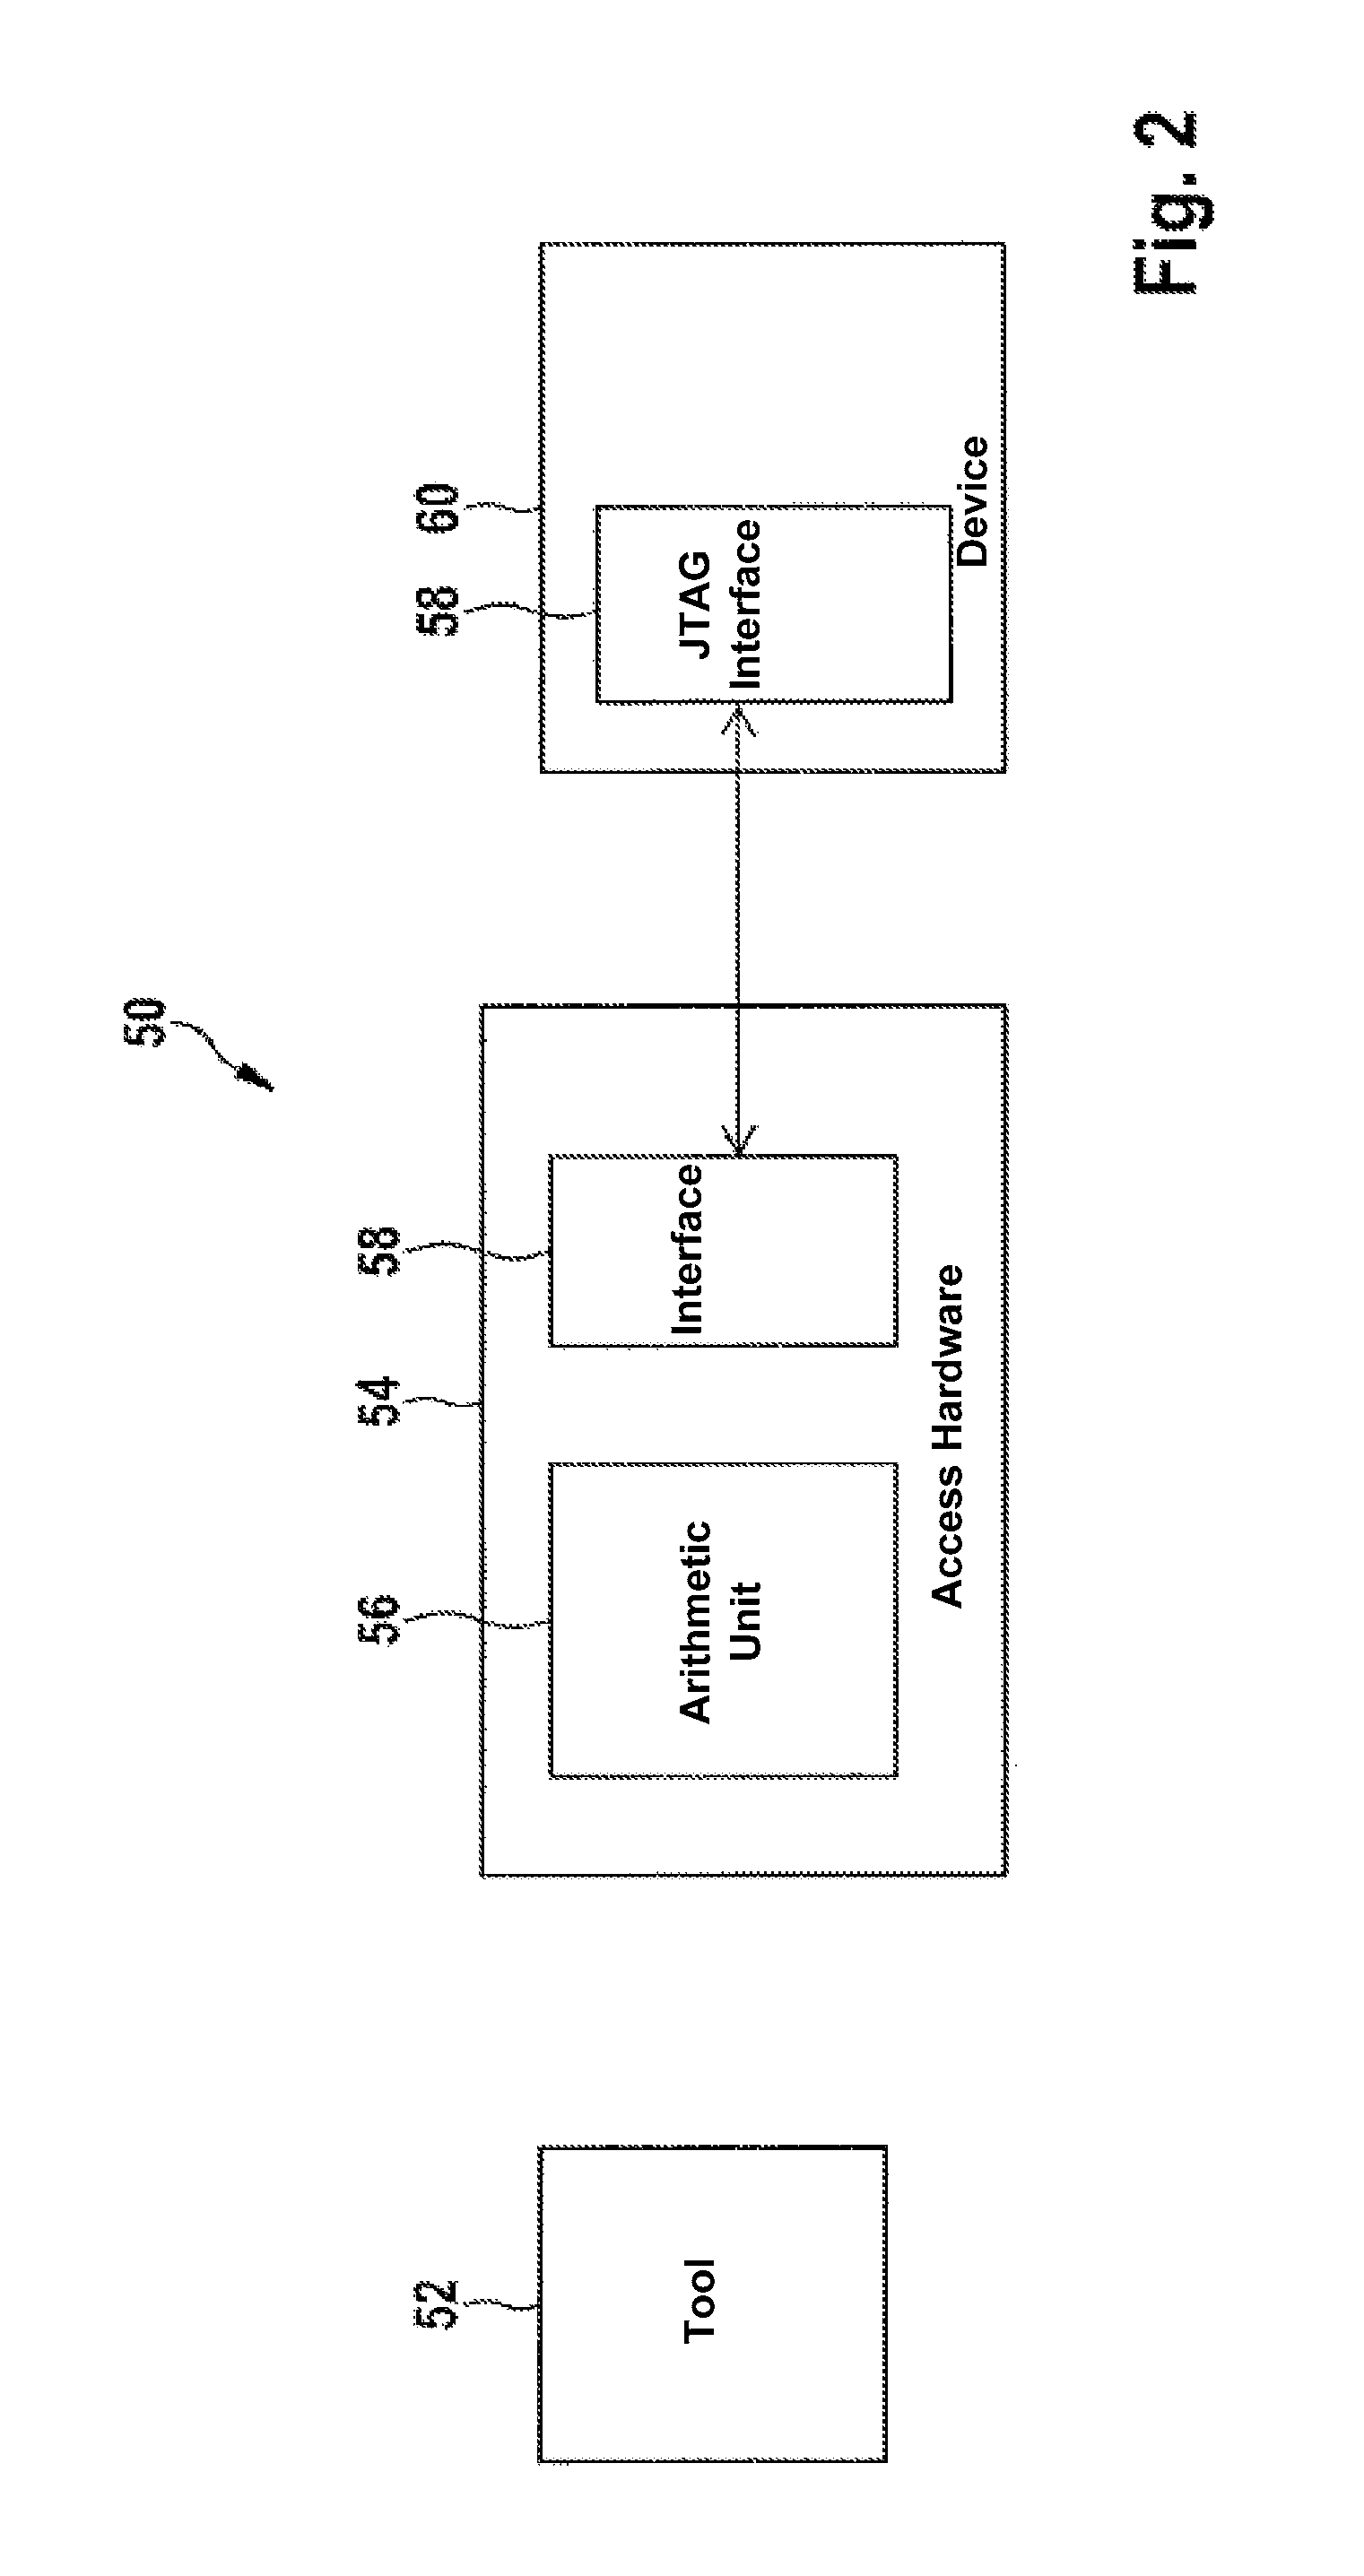 Method for controlling a state machine